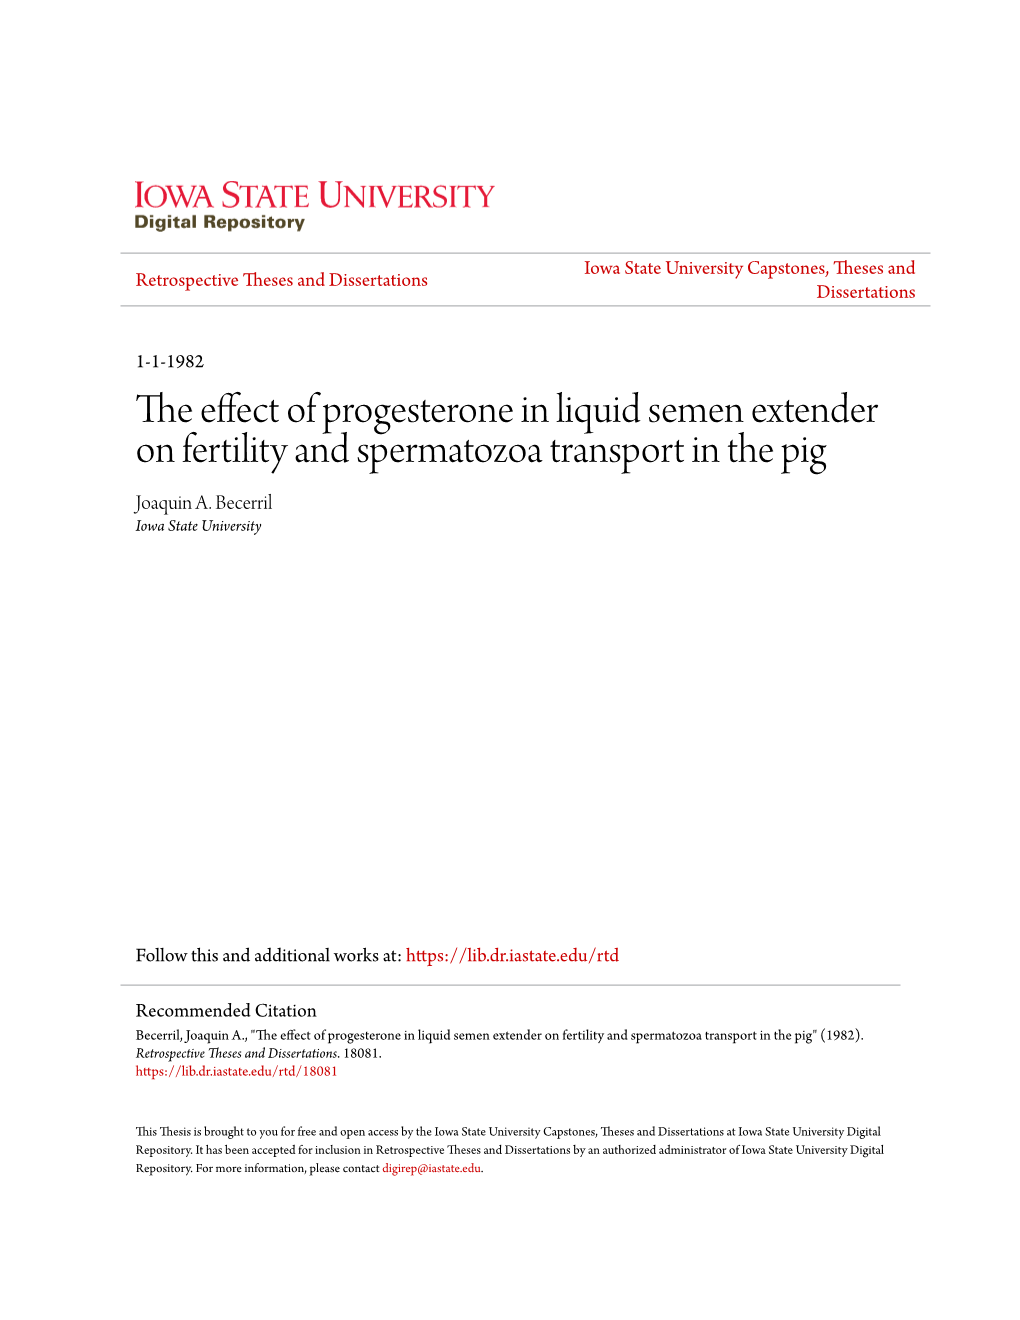 The Effect of Progesterone in Liquid Semen Extender on Fertility and Spermatozoa Transport in the Pig Joaquin A